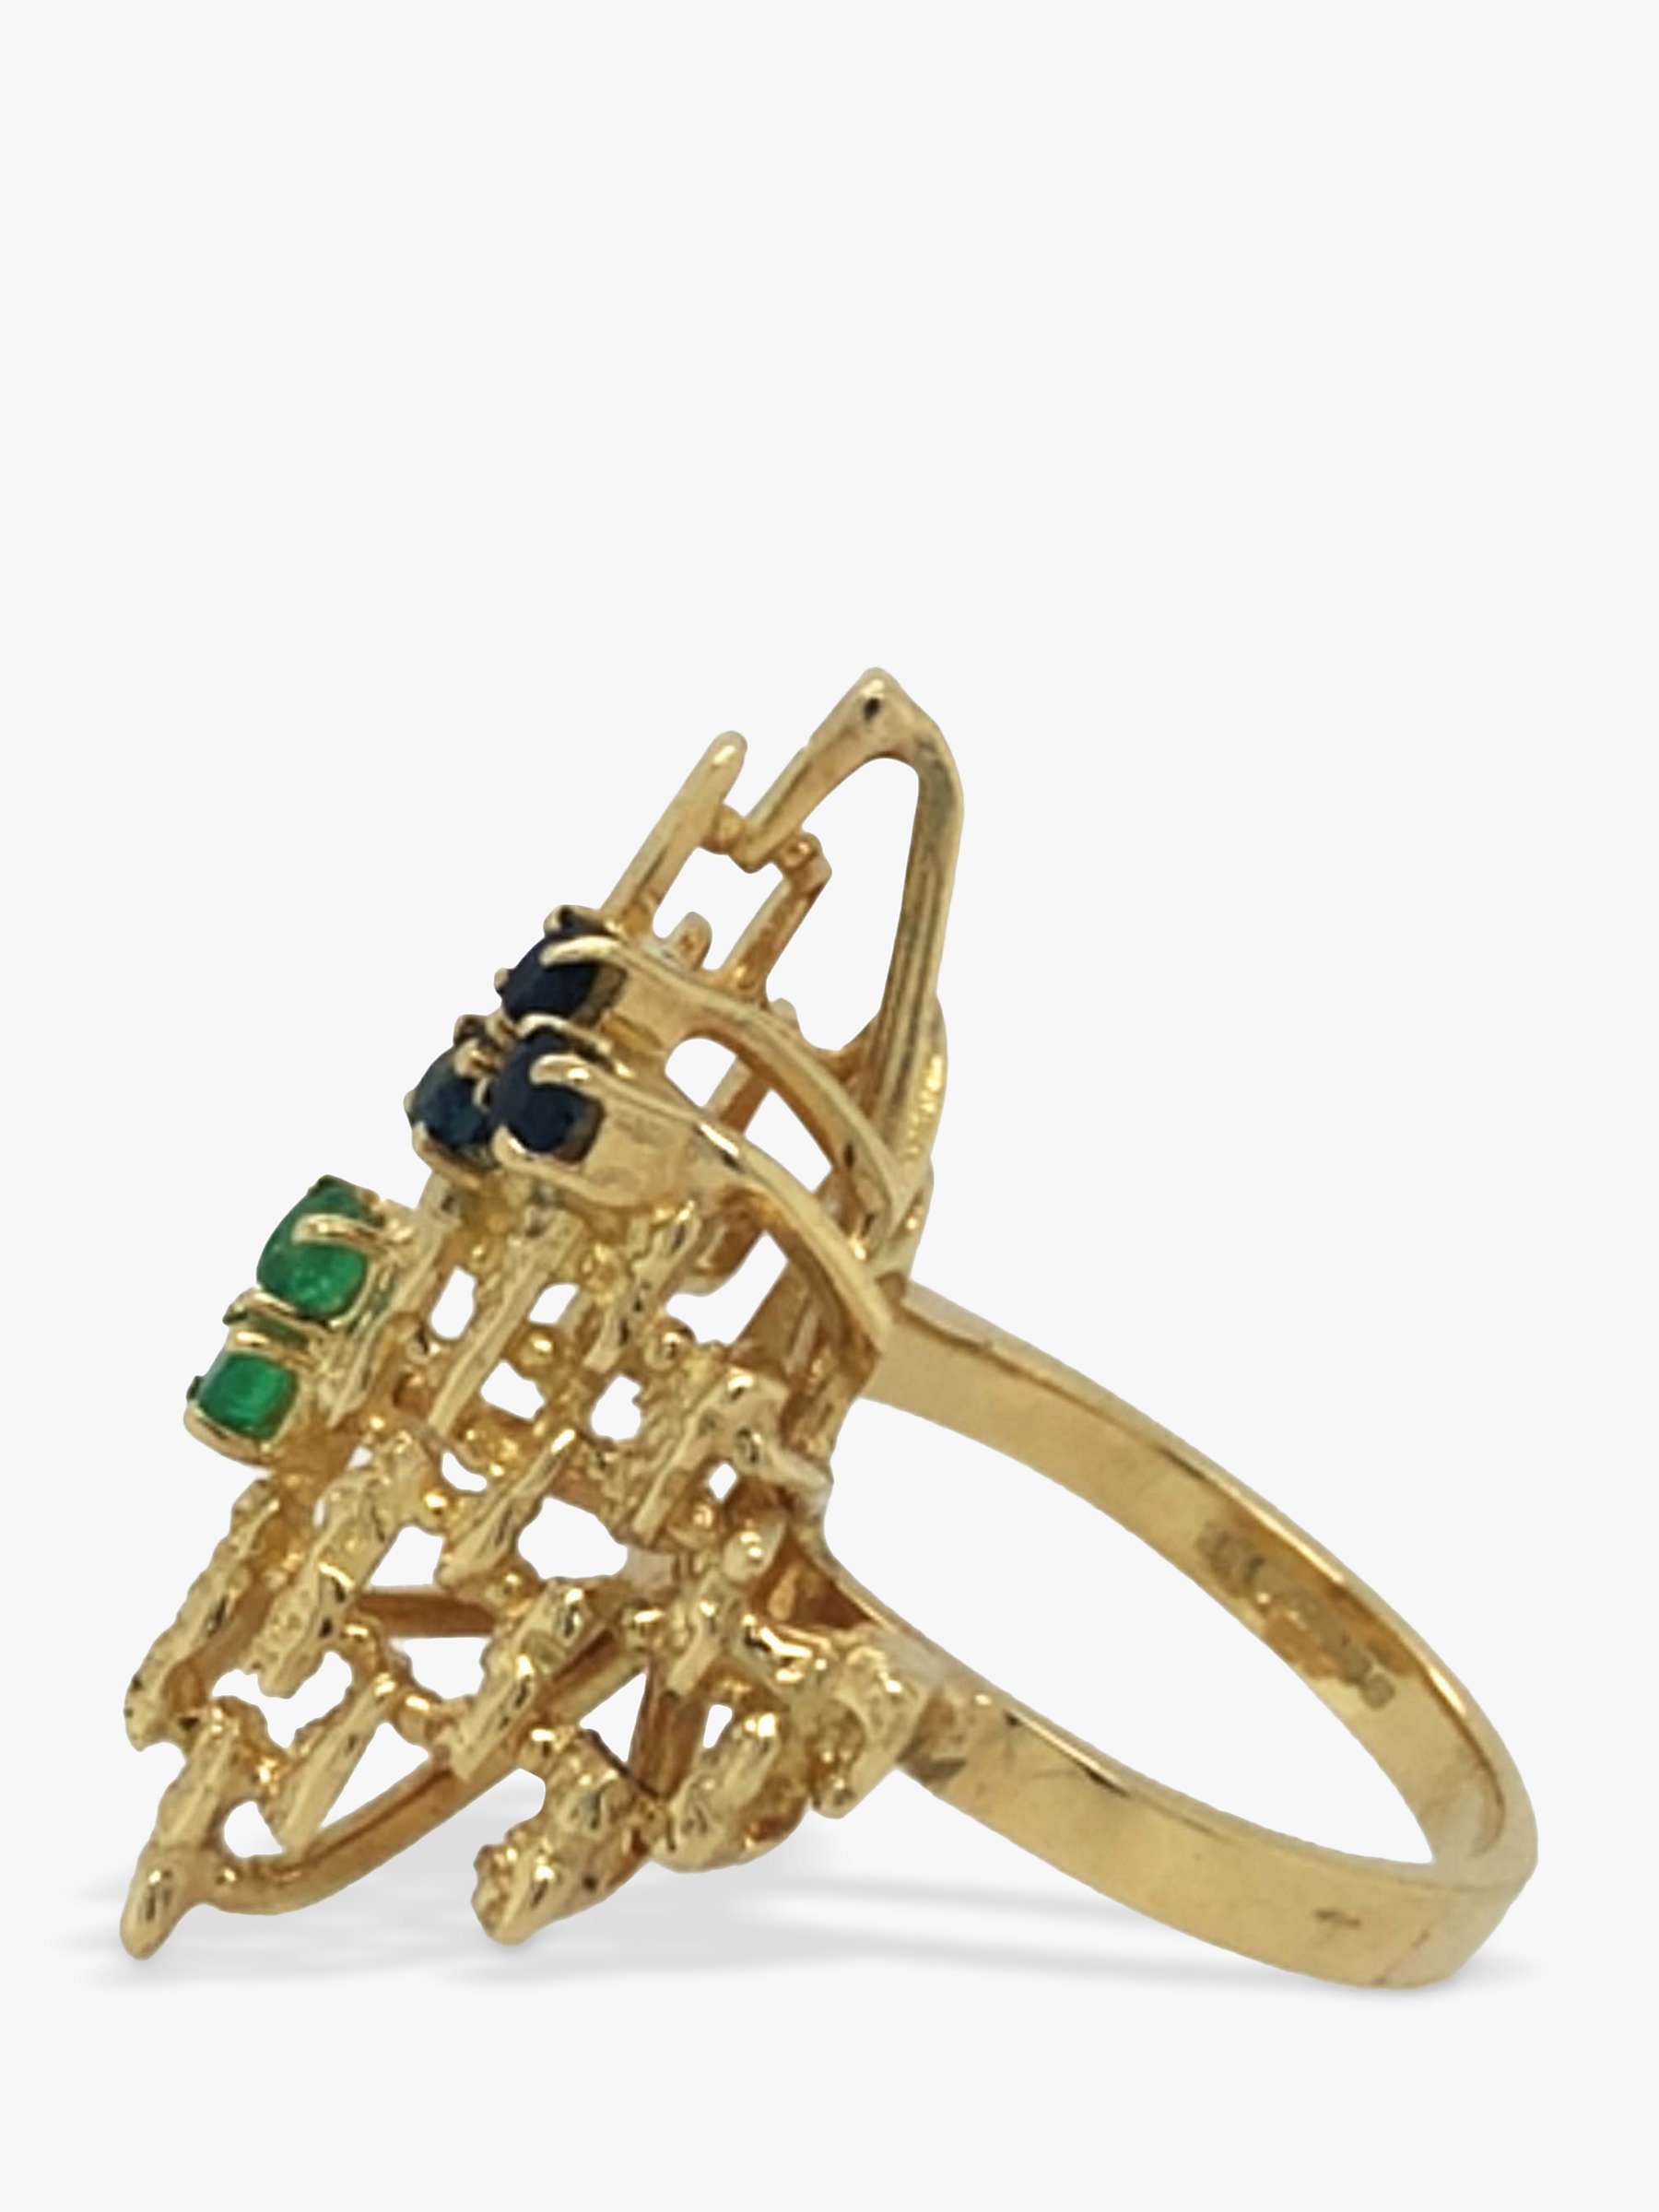 Buy Vintage Fine Jewellery Second Hand 14ct Yellow Gold Sapphire and Emerald Dress Ring, Dated Birmingham 1973 Online at johnlewis.com